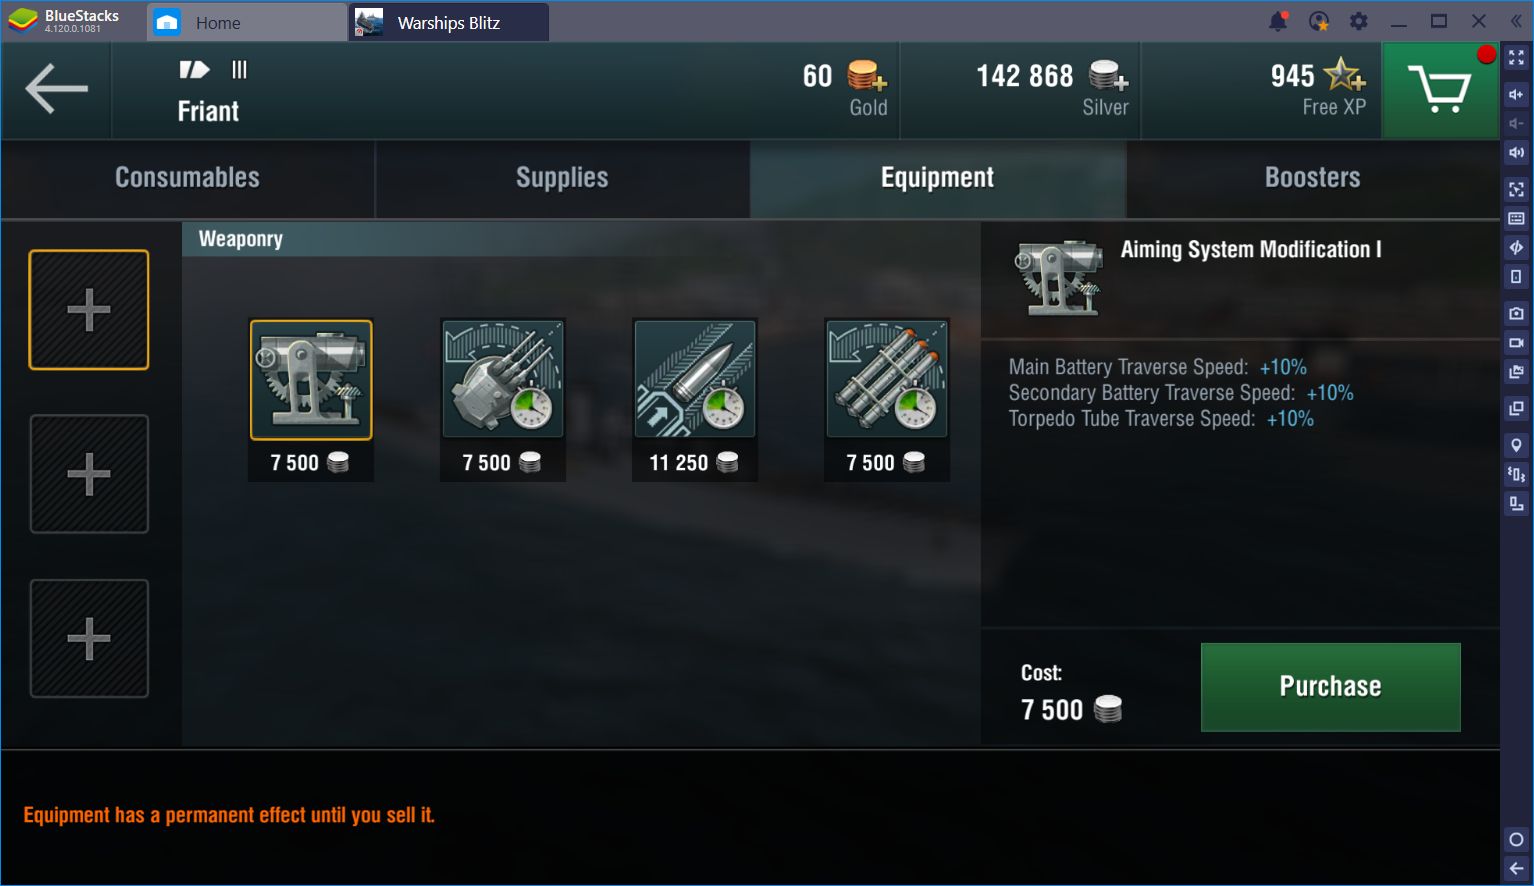 A Glance at the Upgrade System in World of Warships